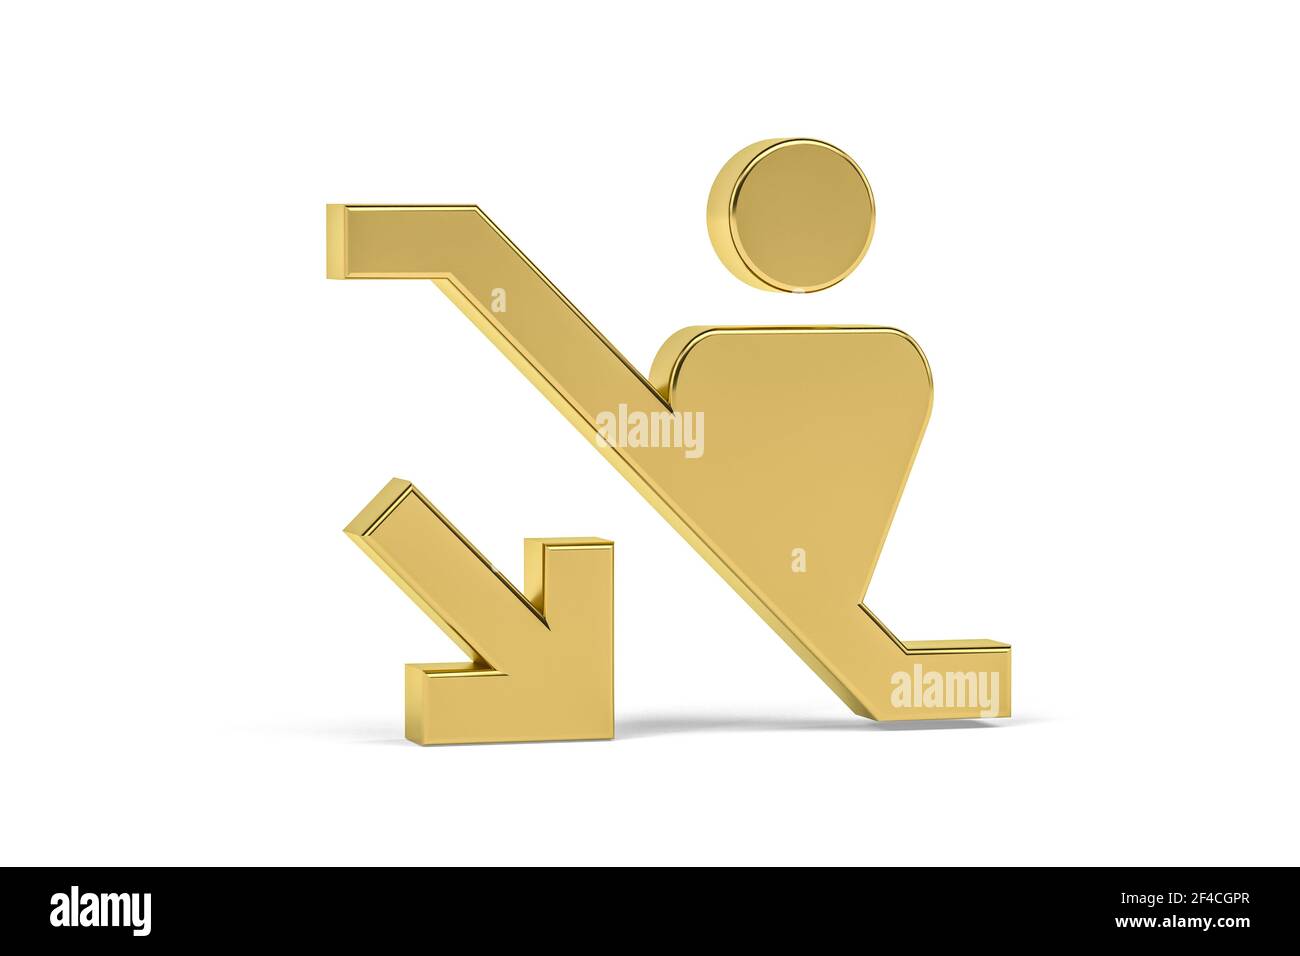 Golden 3d escalator icon isolated on white background - Signs at the airport - 3D render Stock Photo